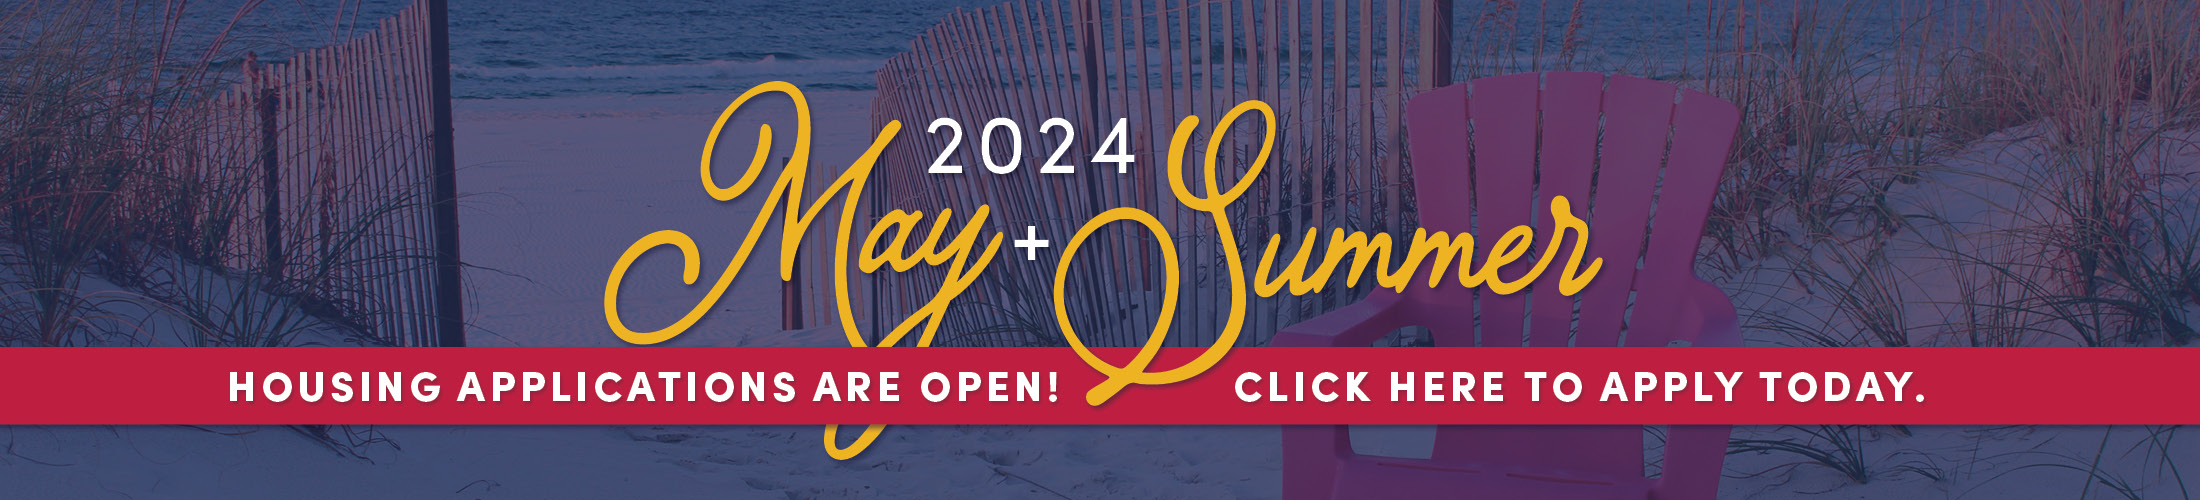 Beach with text about applying for Summer 2024.